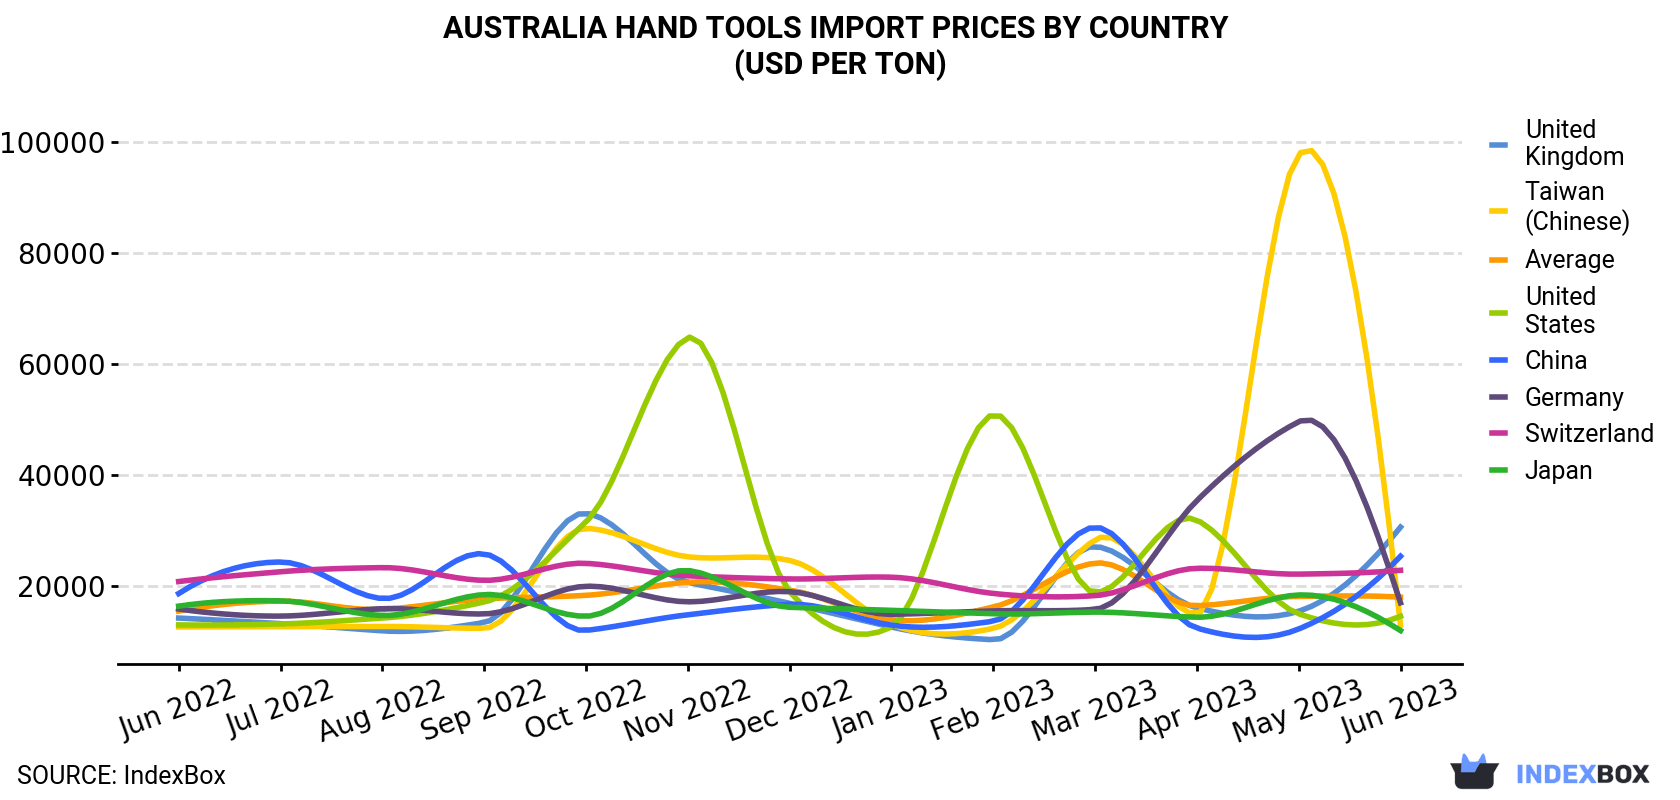 Australia Hand Tools Import Prices By Country (USD Per Ton)